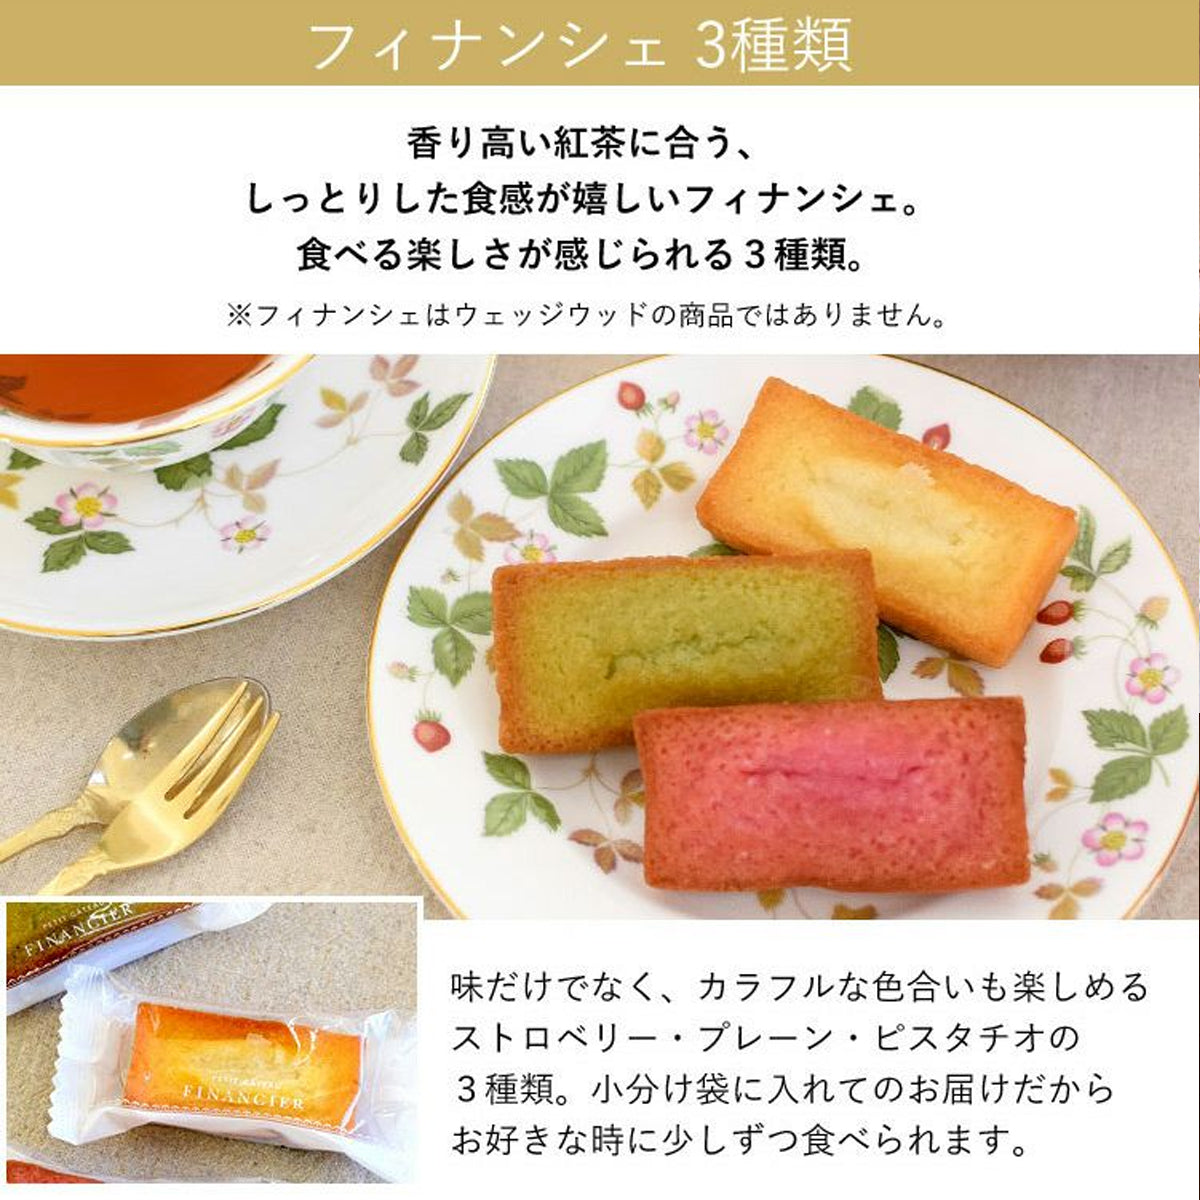 【Mother's Day Special】Red Arrangement (S) & Tea Time Set